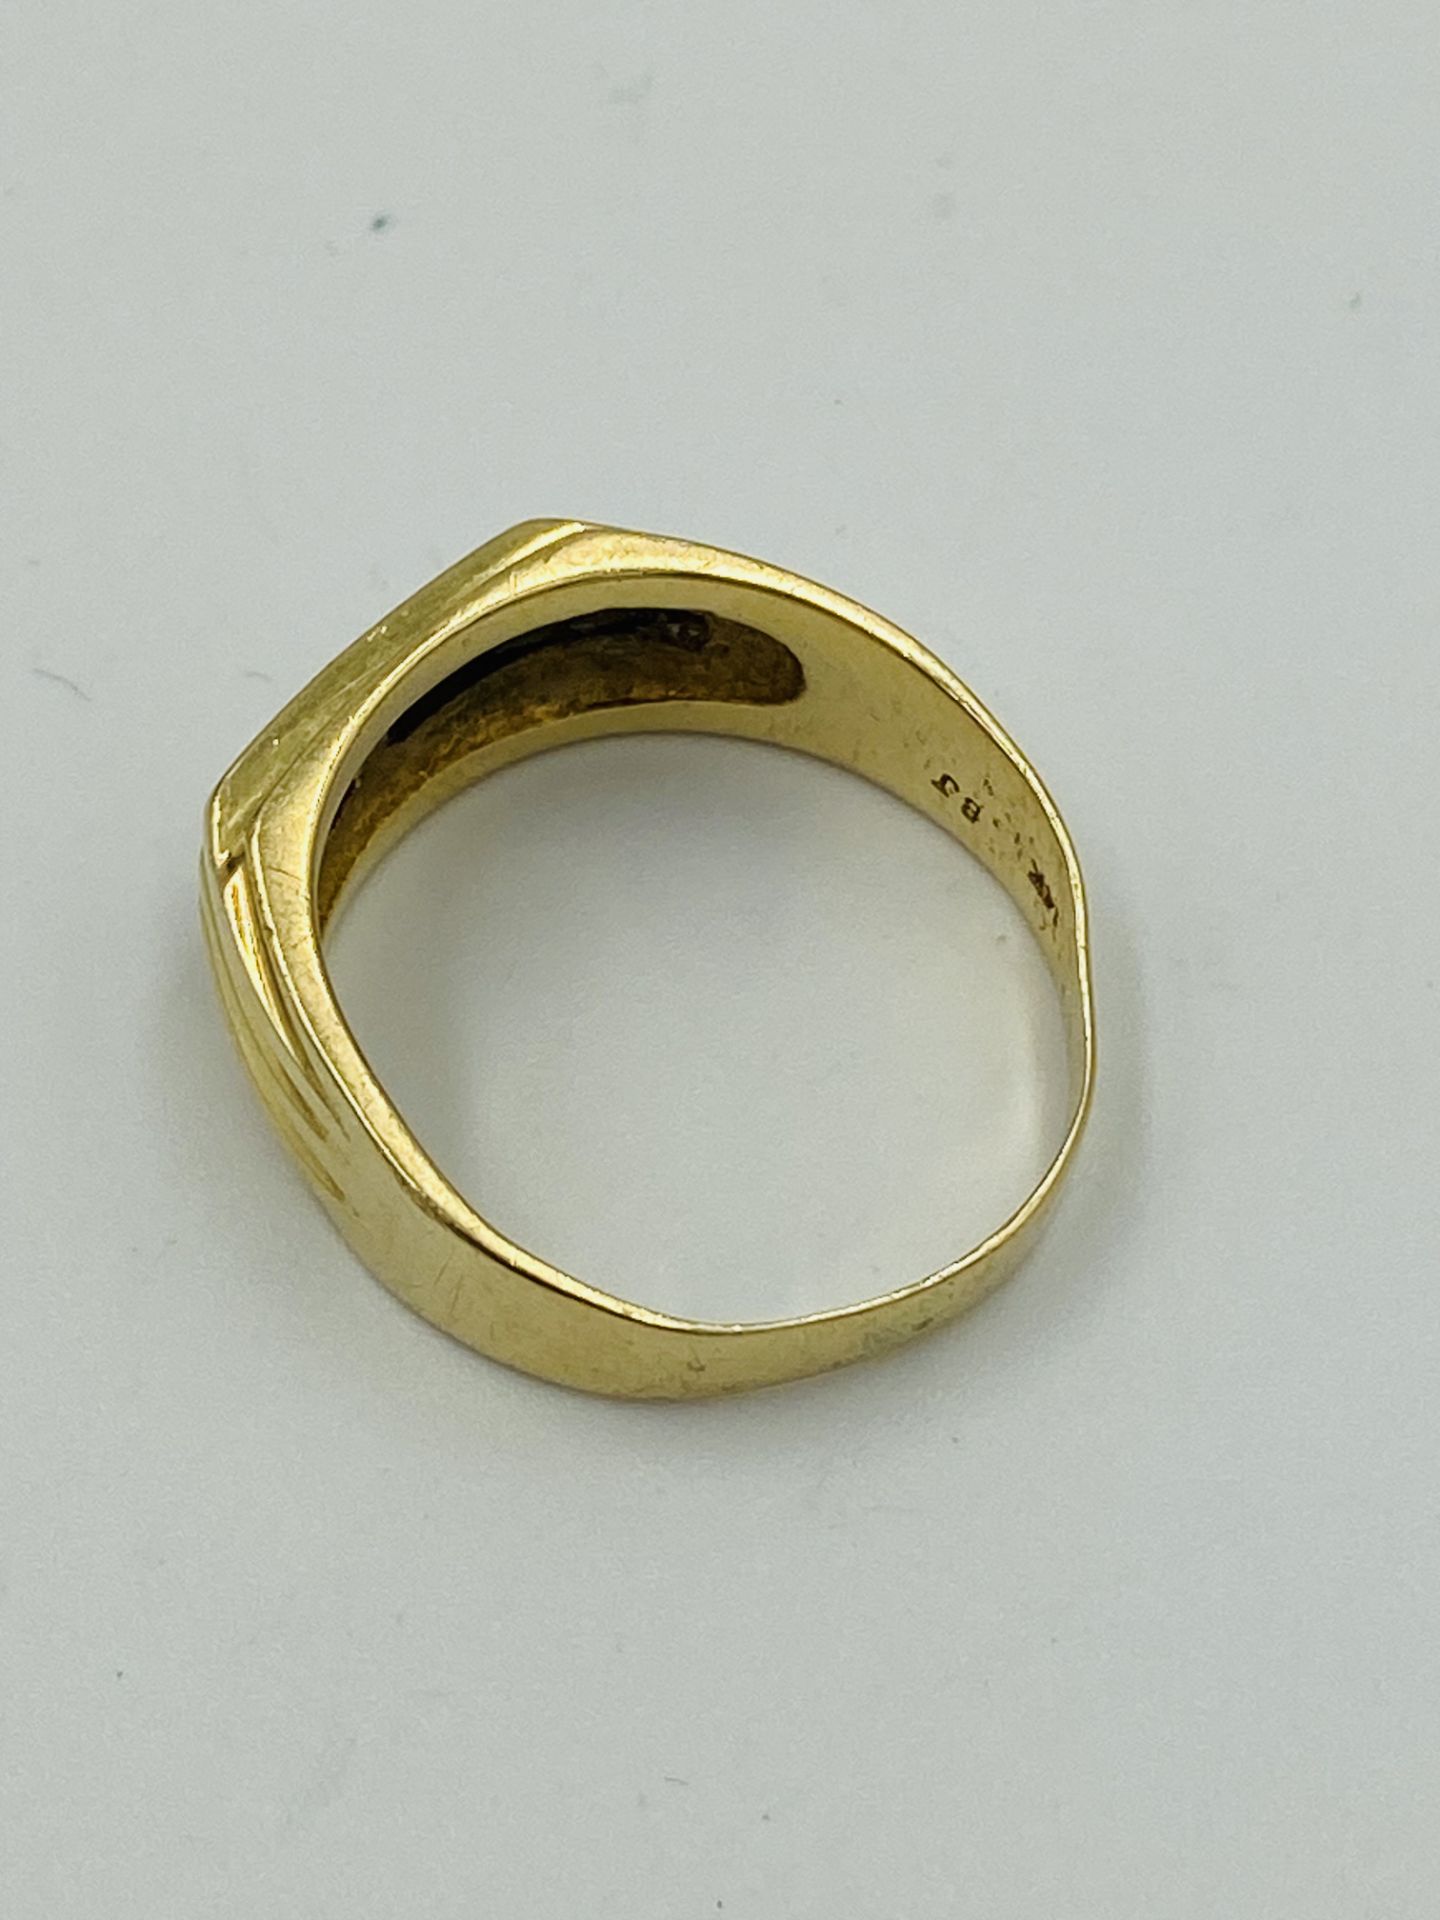 14ct gold ring, set with a diamond - Image 4 of 4